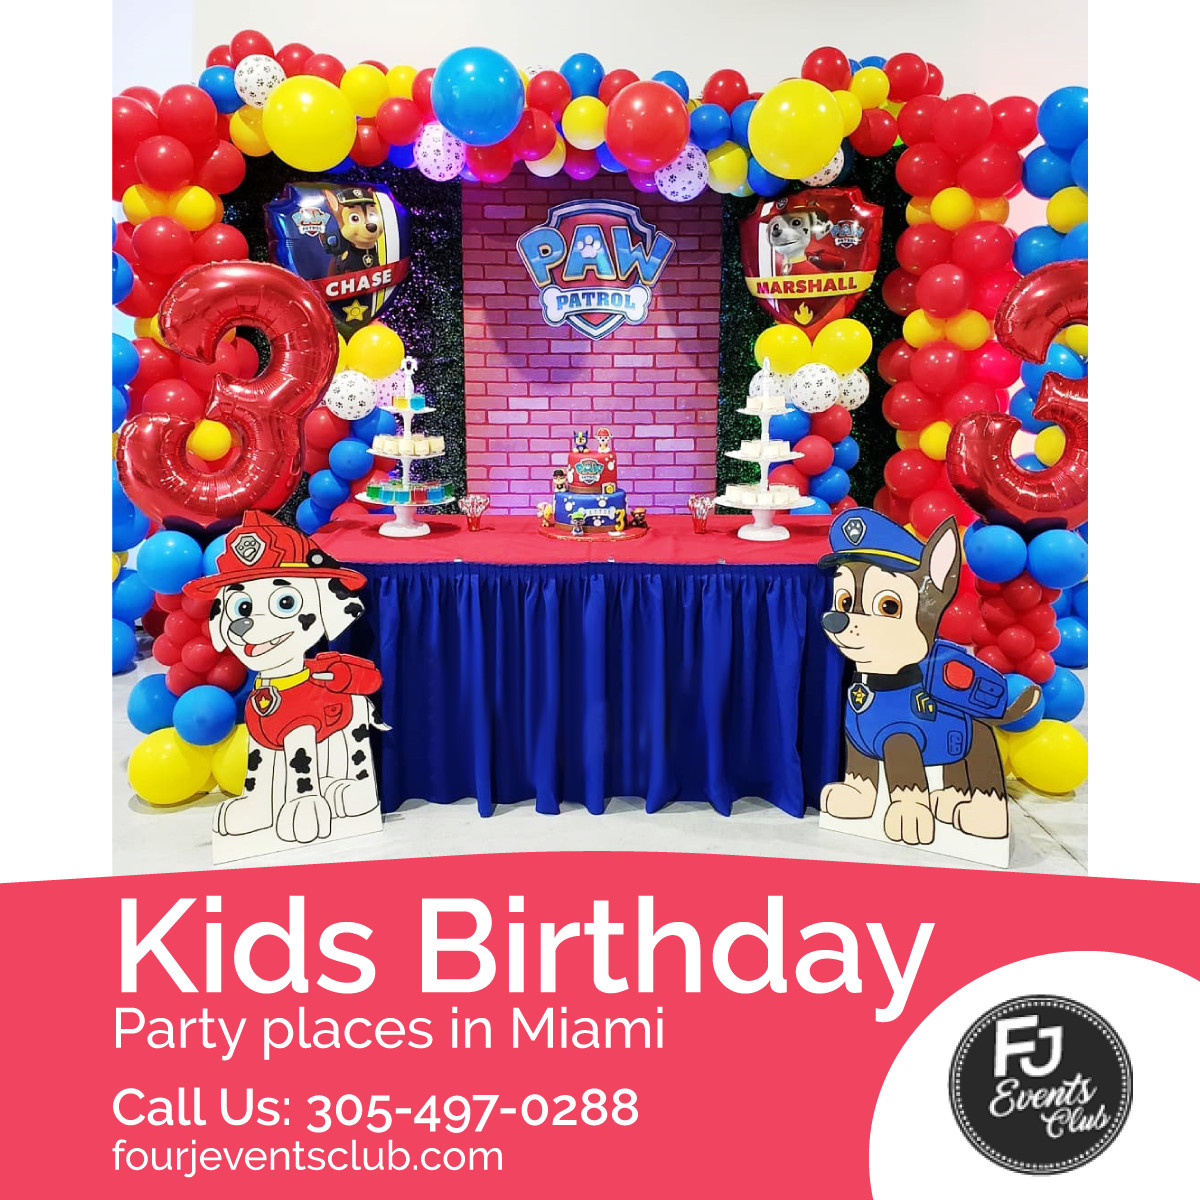 Kids Birthday Party Miami
 Choose the Ideal Venue For your Kid’s Birthday Party